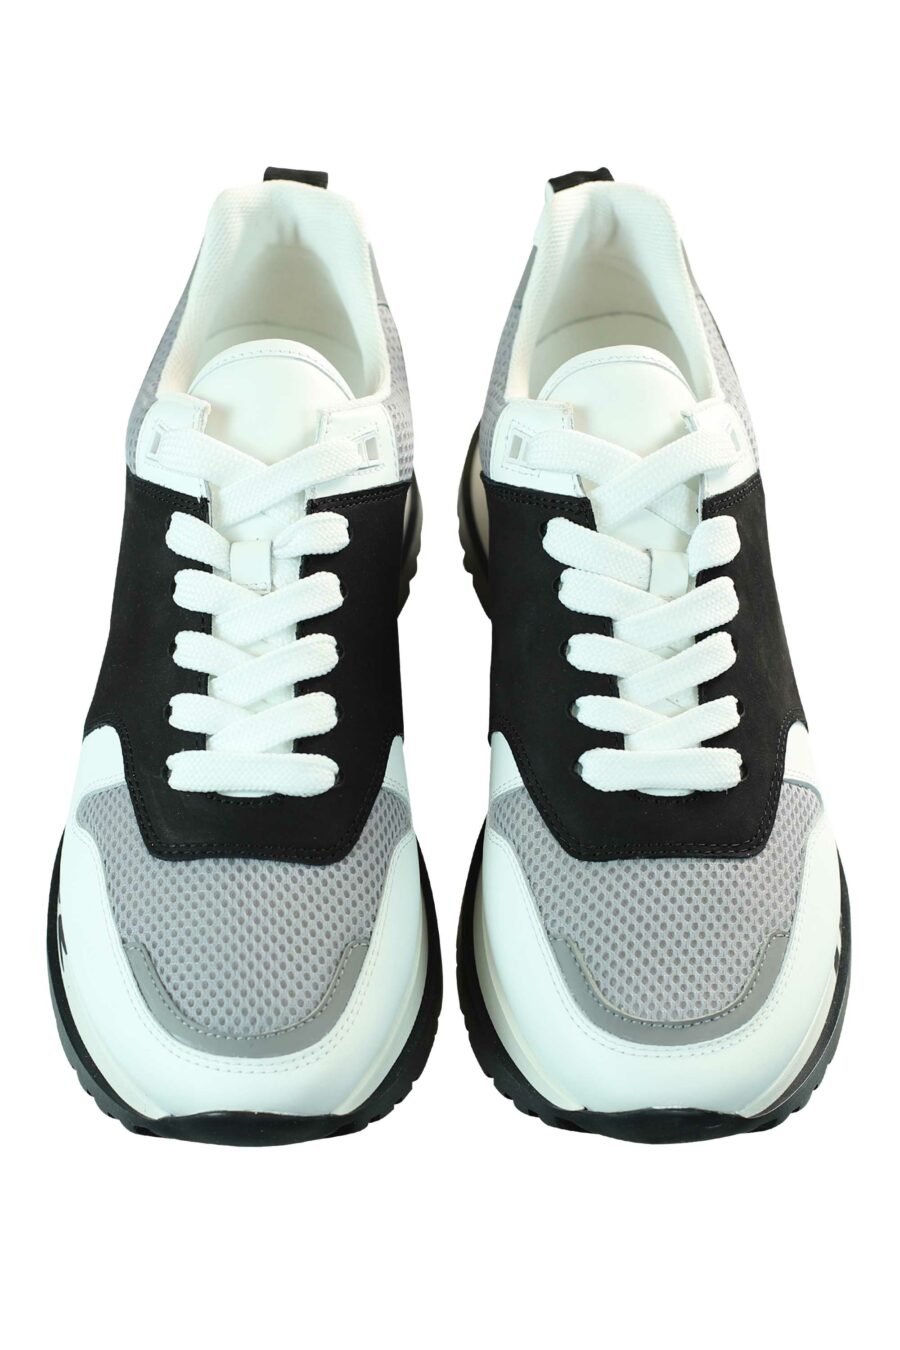 Black mix running shoes with logo on sole - 8055777205655 5